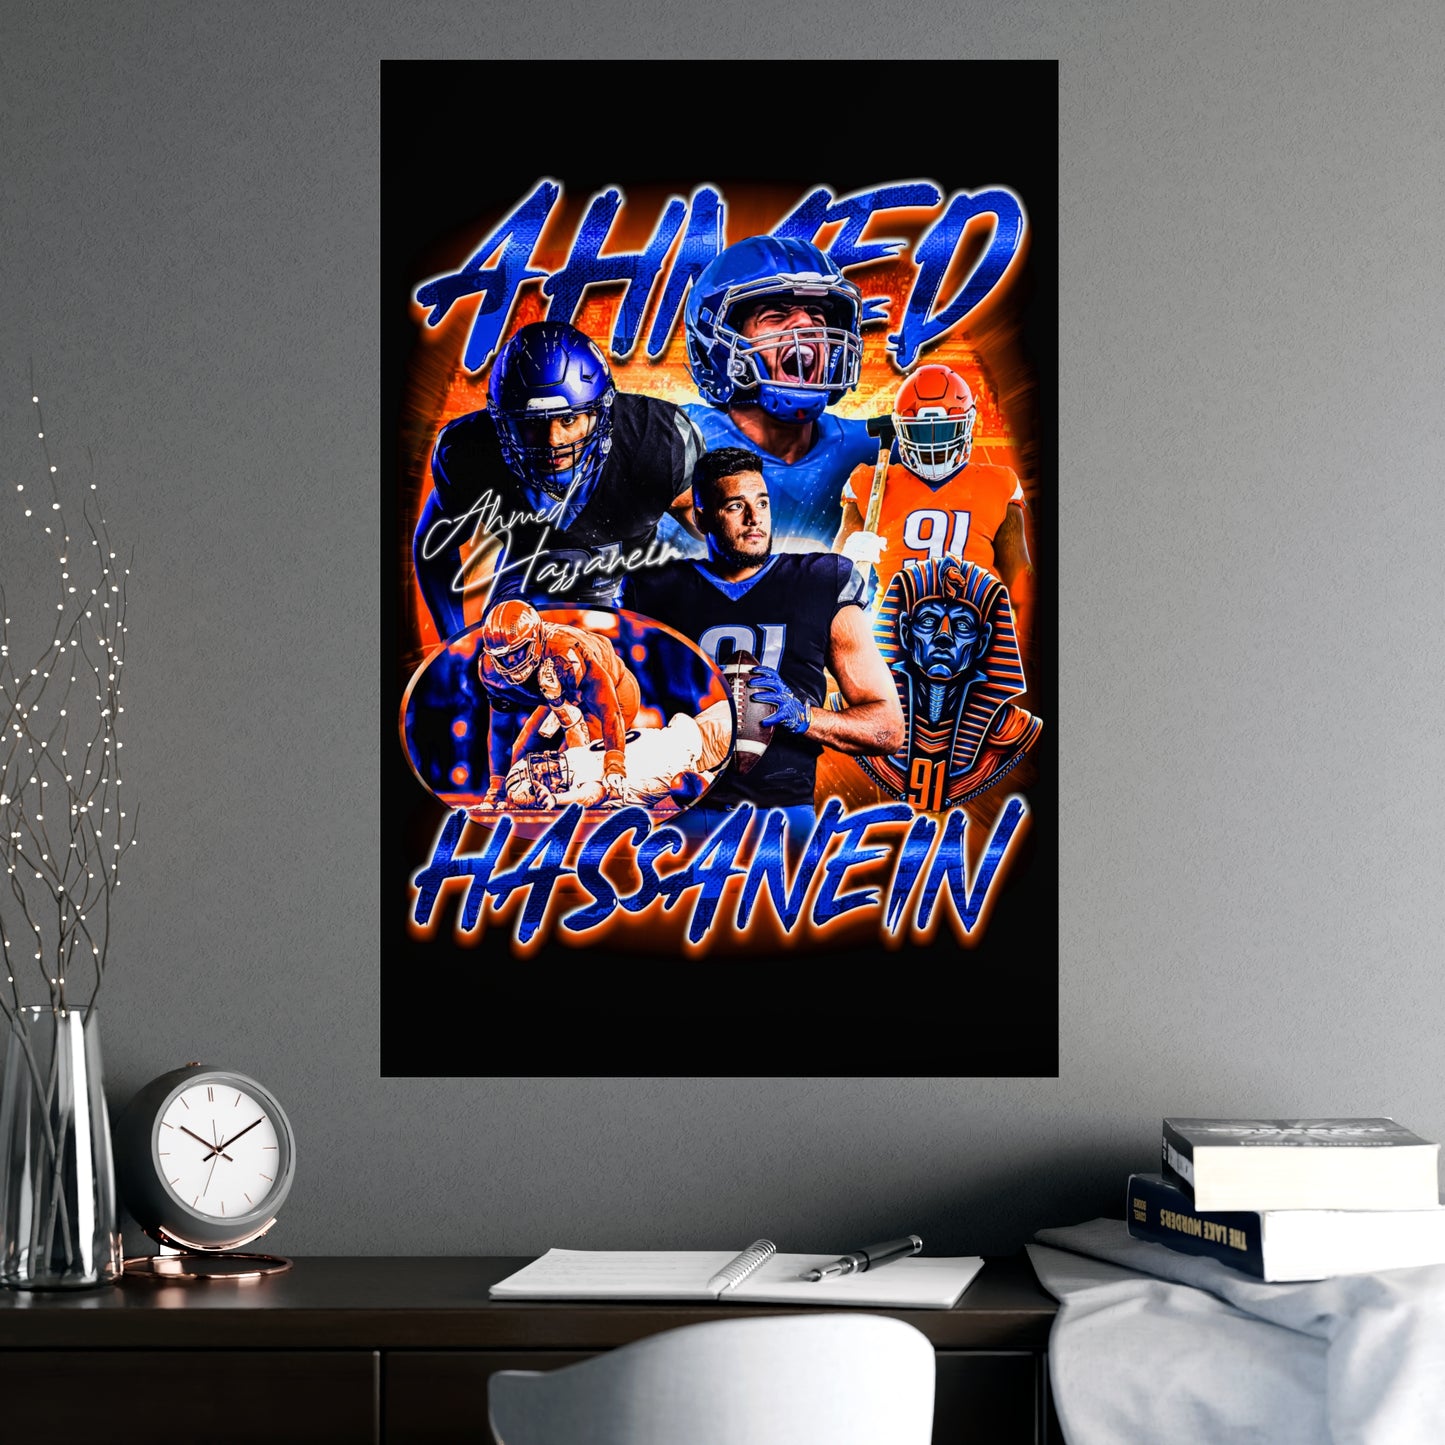 HASSANEIN 24"x36" POSTER